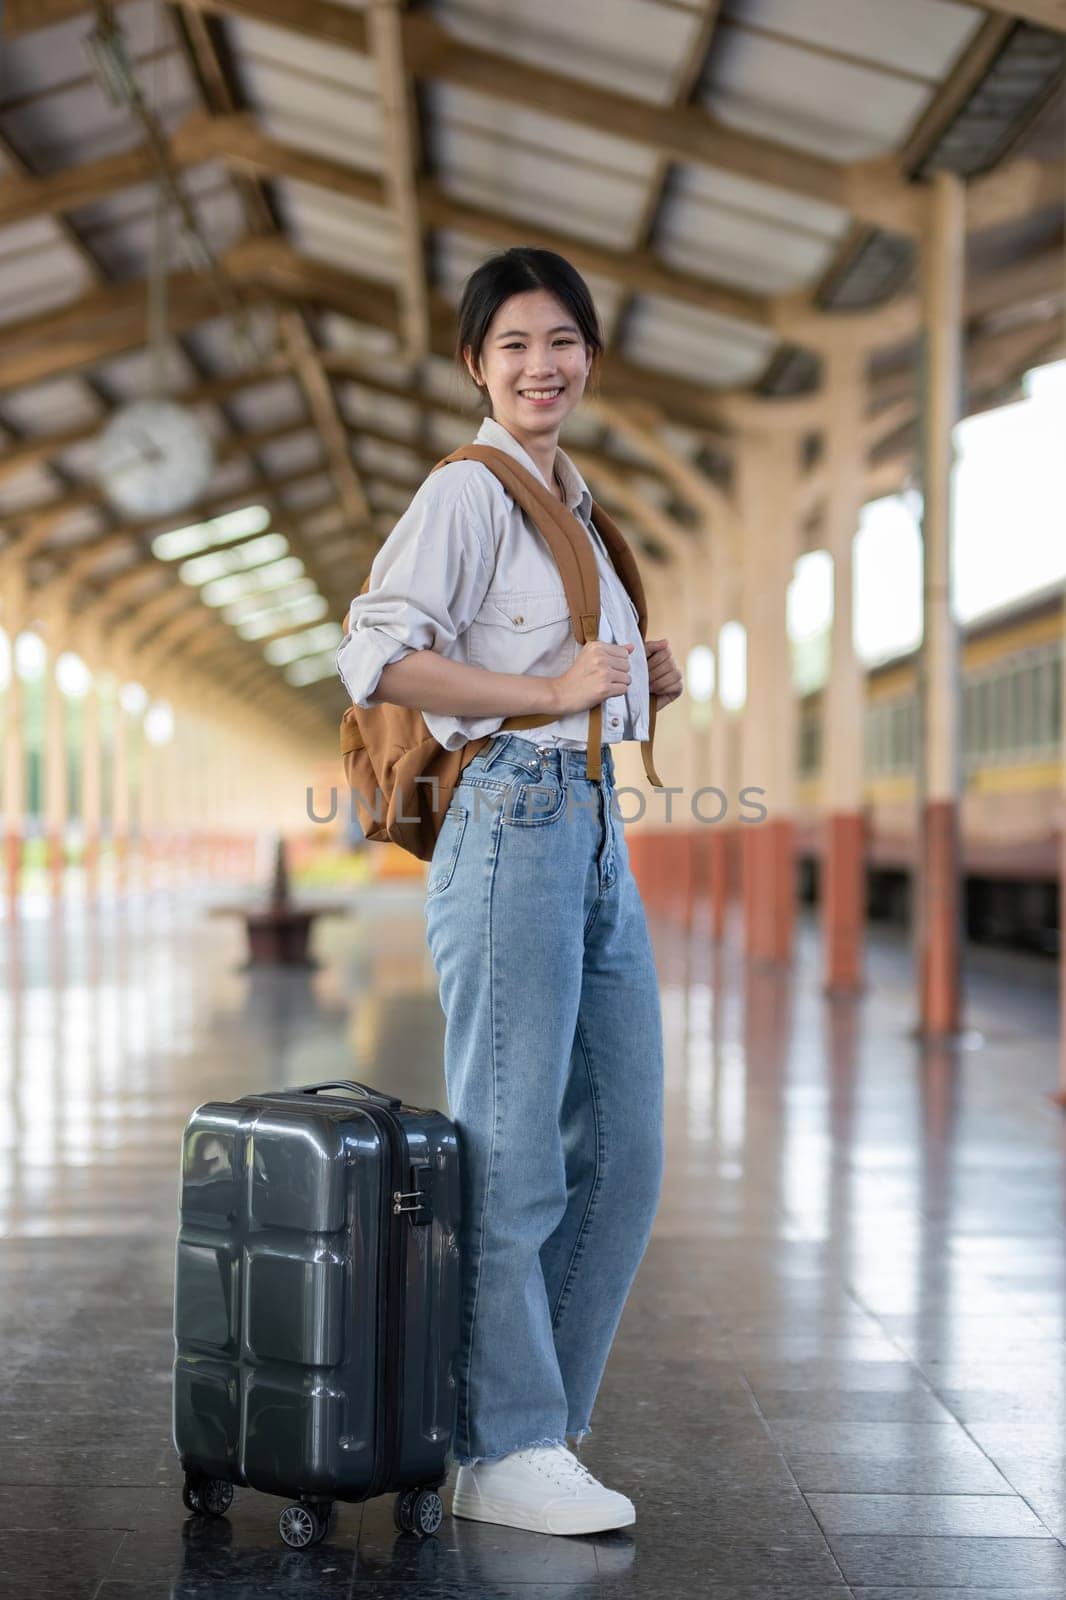 Happy young Asian female tourist carrying a backpack, holding a camera, preparing to wait for the train at the train station waiting for her vacation trip. by wichayada